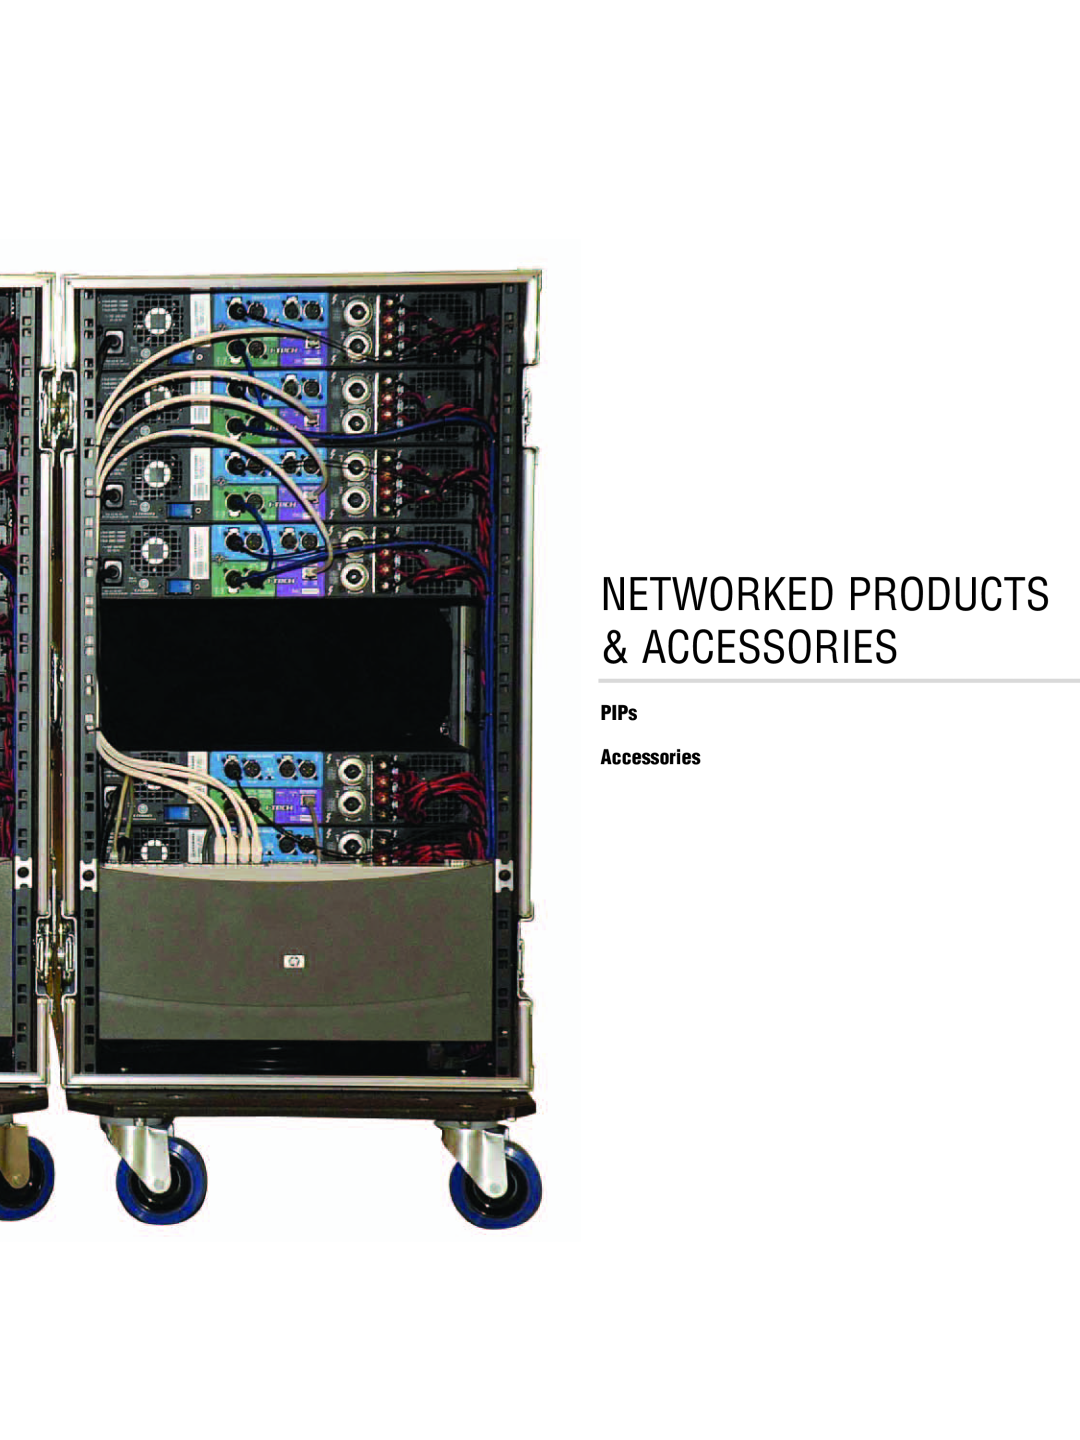 Crown CTS 2000, CTS 3000, CTS 1200, CTS 600 manual Networked Products & Accessories, PIPs Accessories 